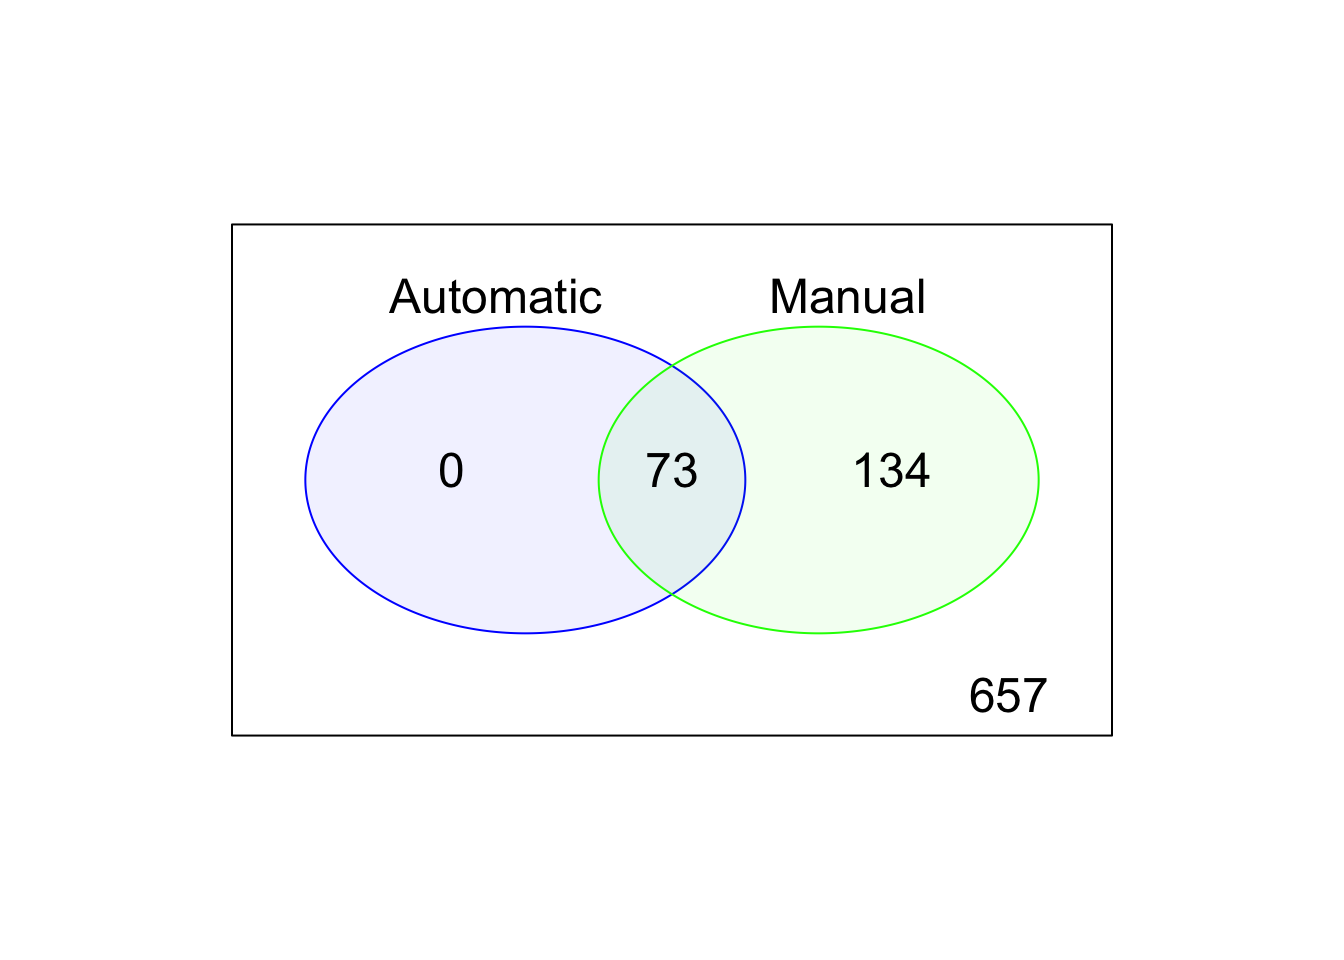 Comparison of the default, automatic and manual cell filters